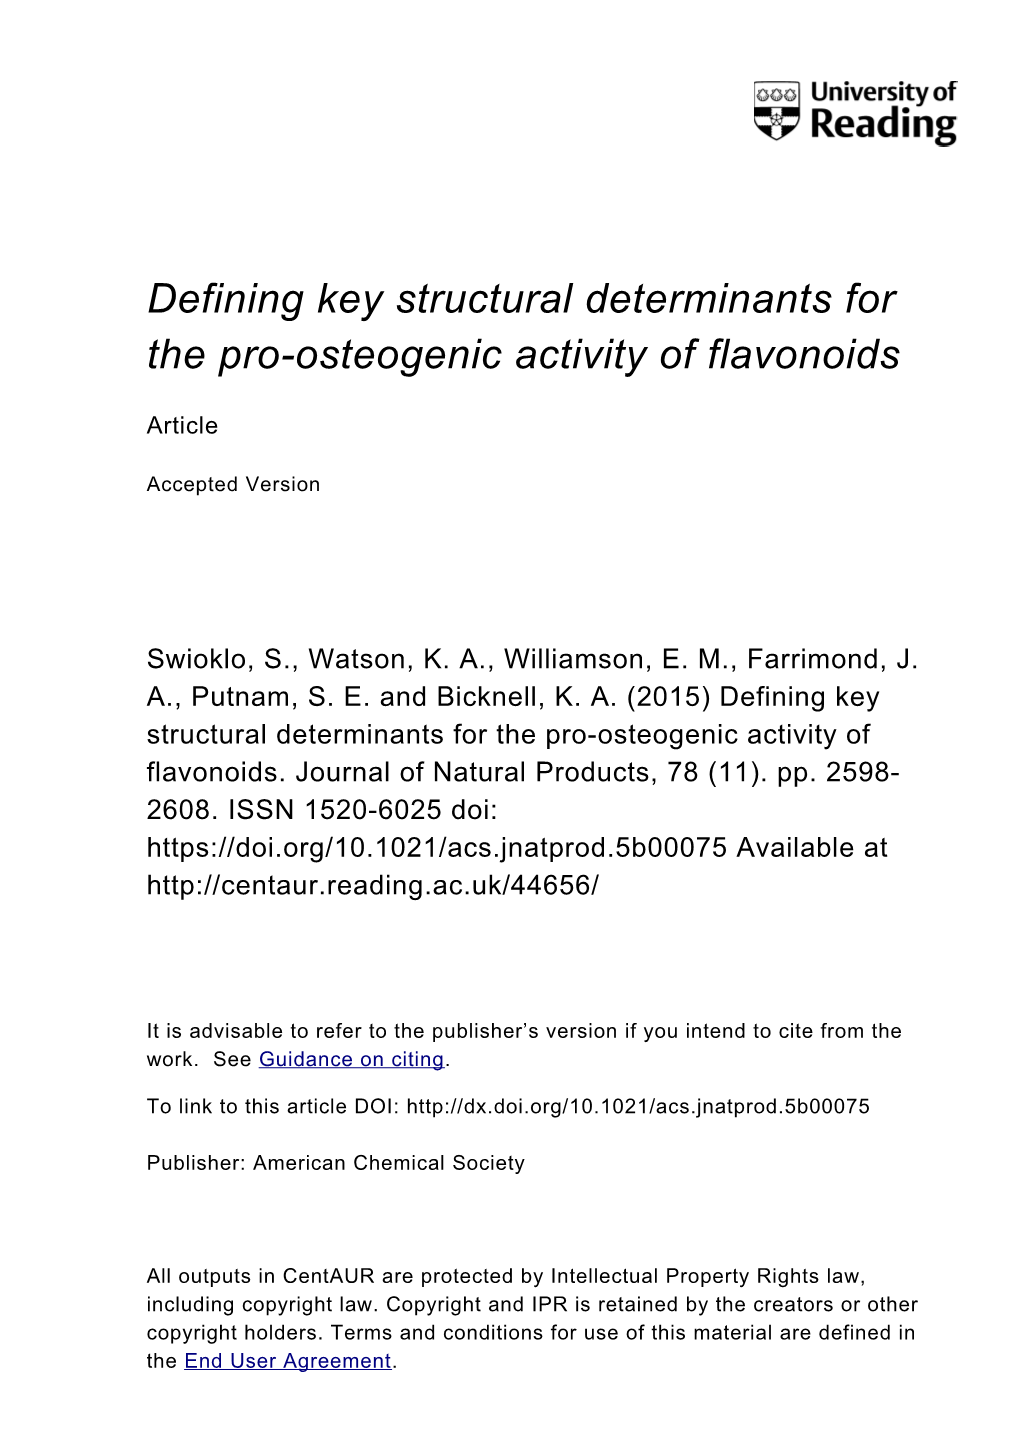 Defining Key Structural Determinants for the Pro-Osteogenic Activity of Flavonoids